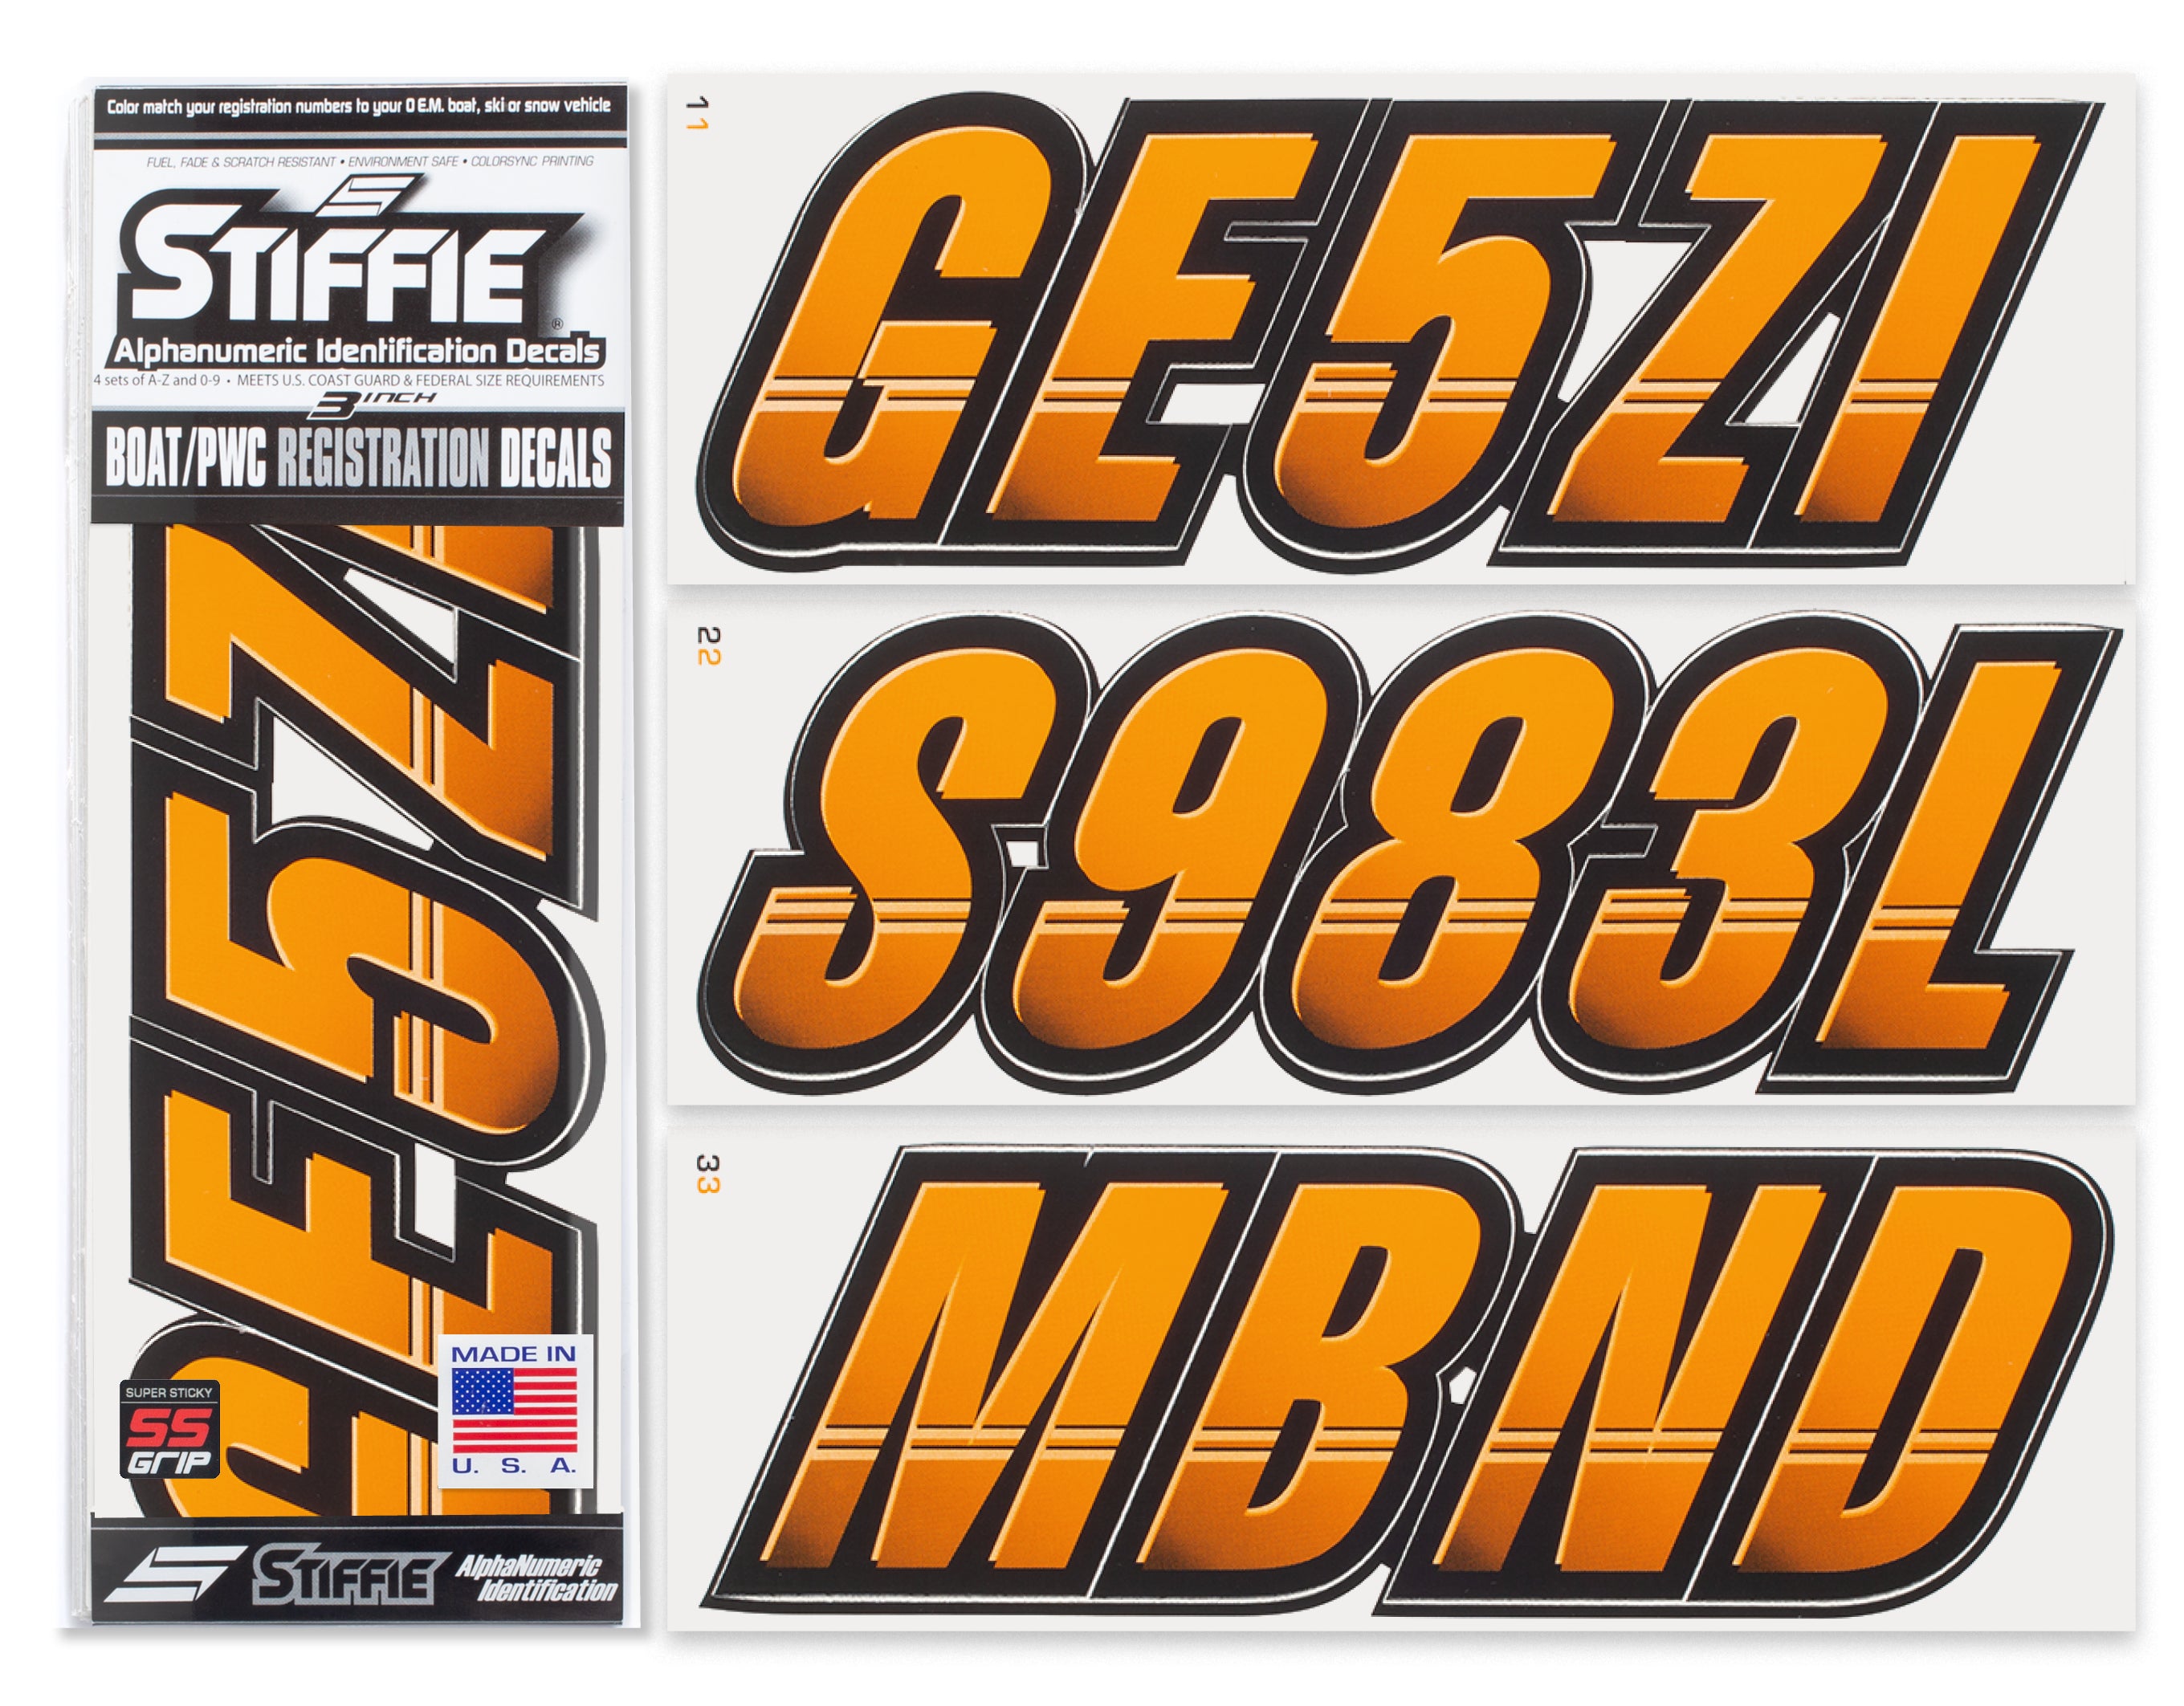 Stiffie Techtron Orange Crush/Black Super Sticky 3" Alpha Numeric Registration Identification Numbers Stickers Decals for Sea-Doo Spark, Inflatable Boats, Ribs, Hypalon/PVC, PWC and Boats